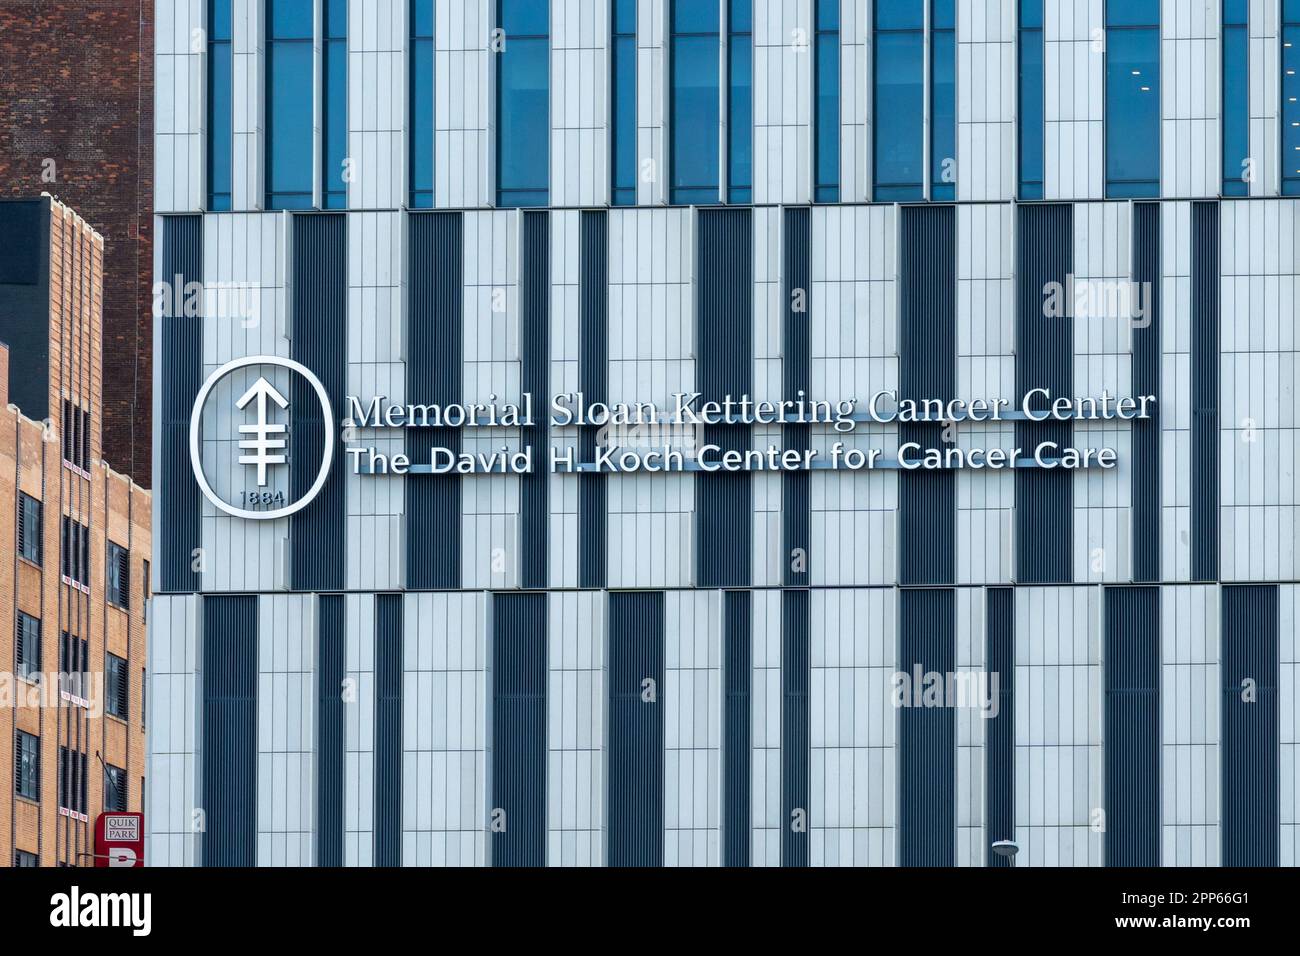 The sign for Memorial Sloan Kettering Cancer Center- David H. Koch Center on the building in New York City, New York, USA Stock Photo